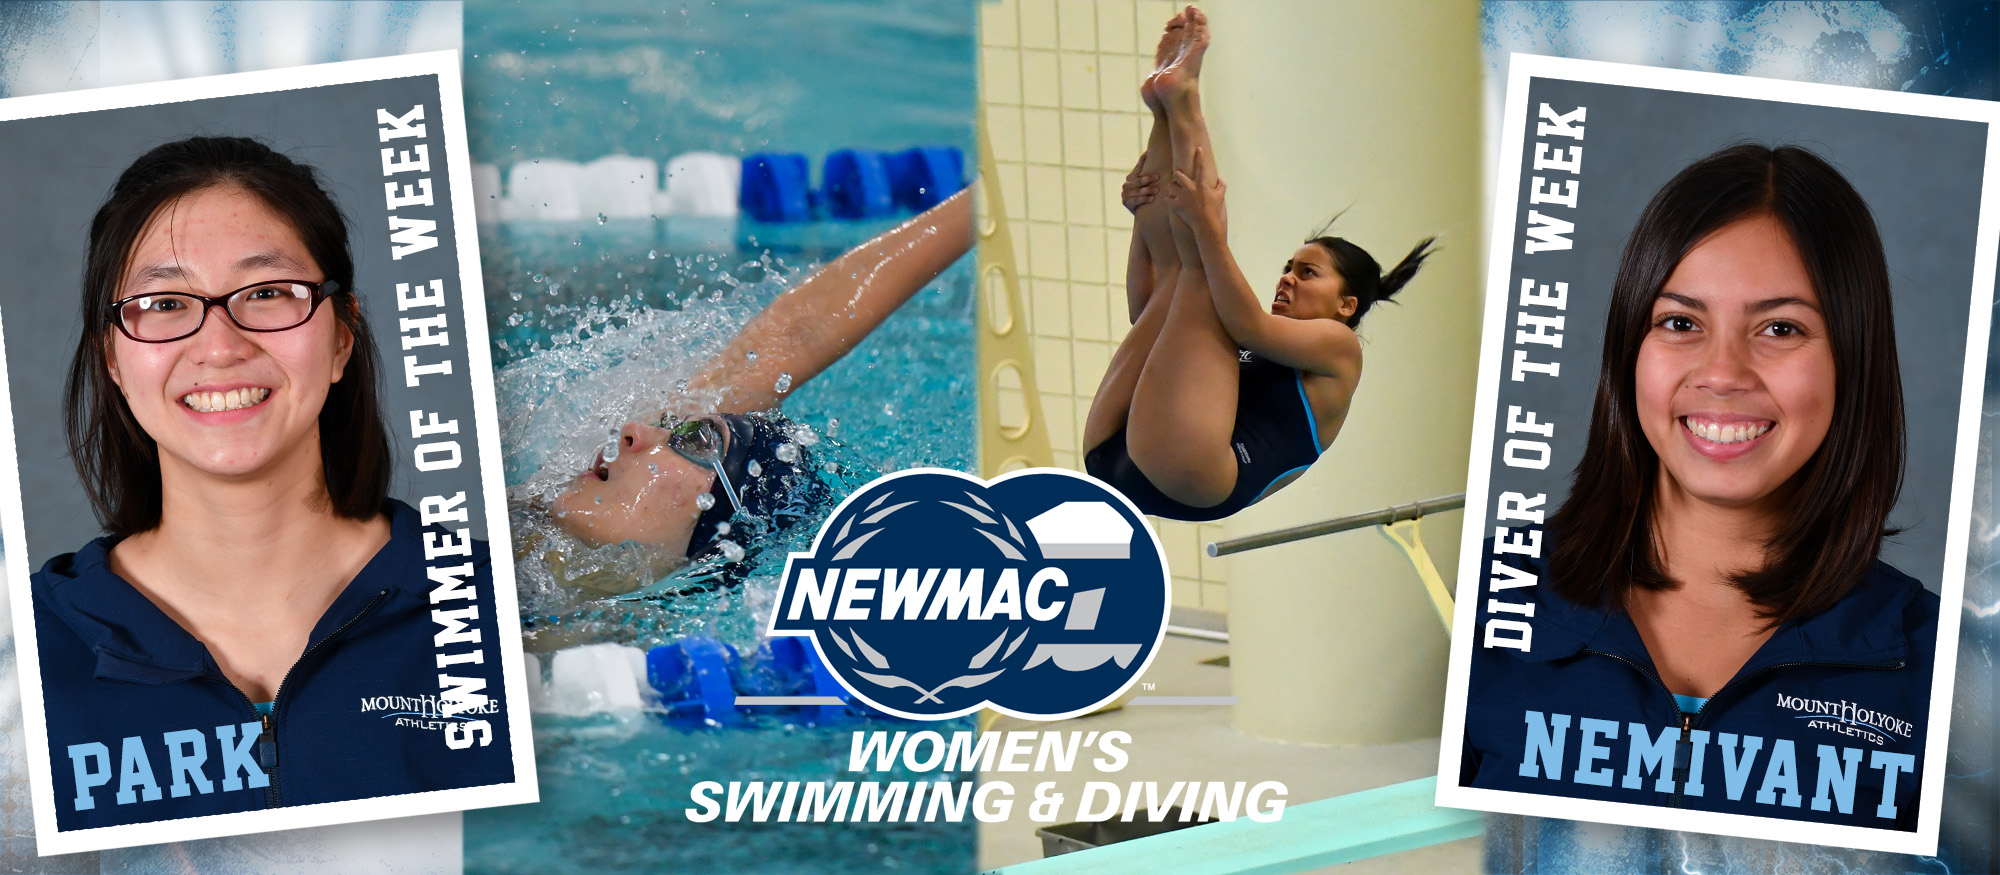 Image depicting the NEWMAC Swimmer of the Week, Jacqueline Park and the NEWMAC Diver of the Week, Samantha Nemivant - who were named on February 11, 2019.